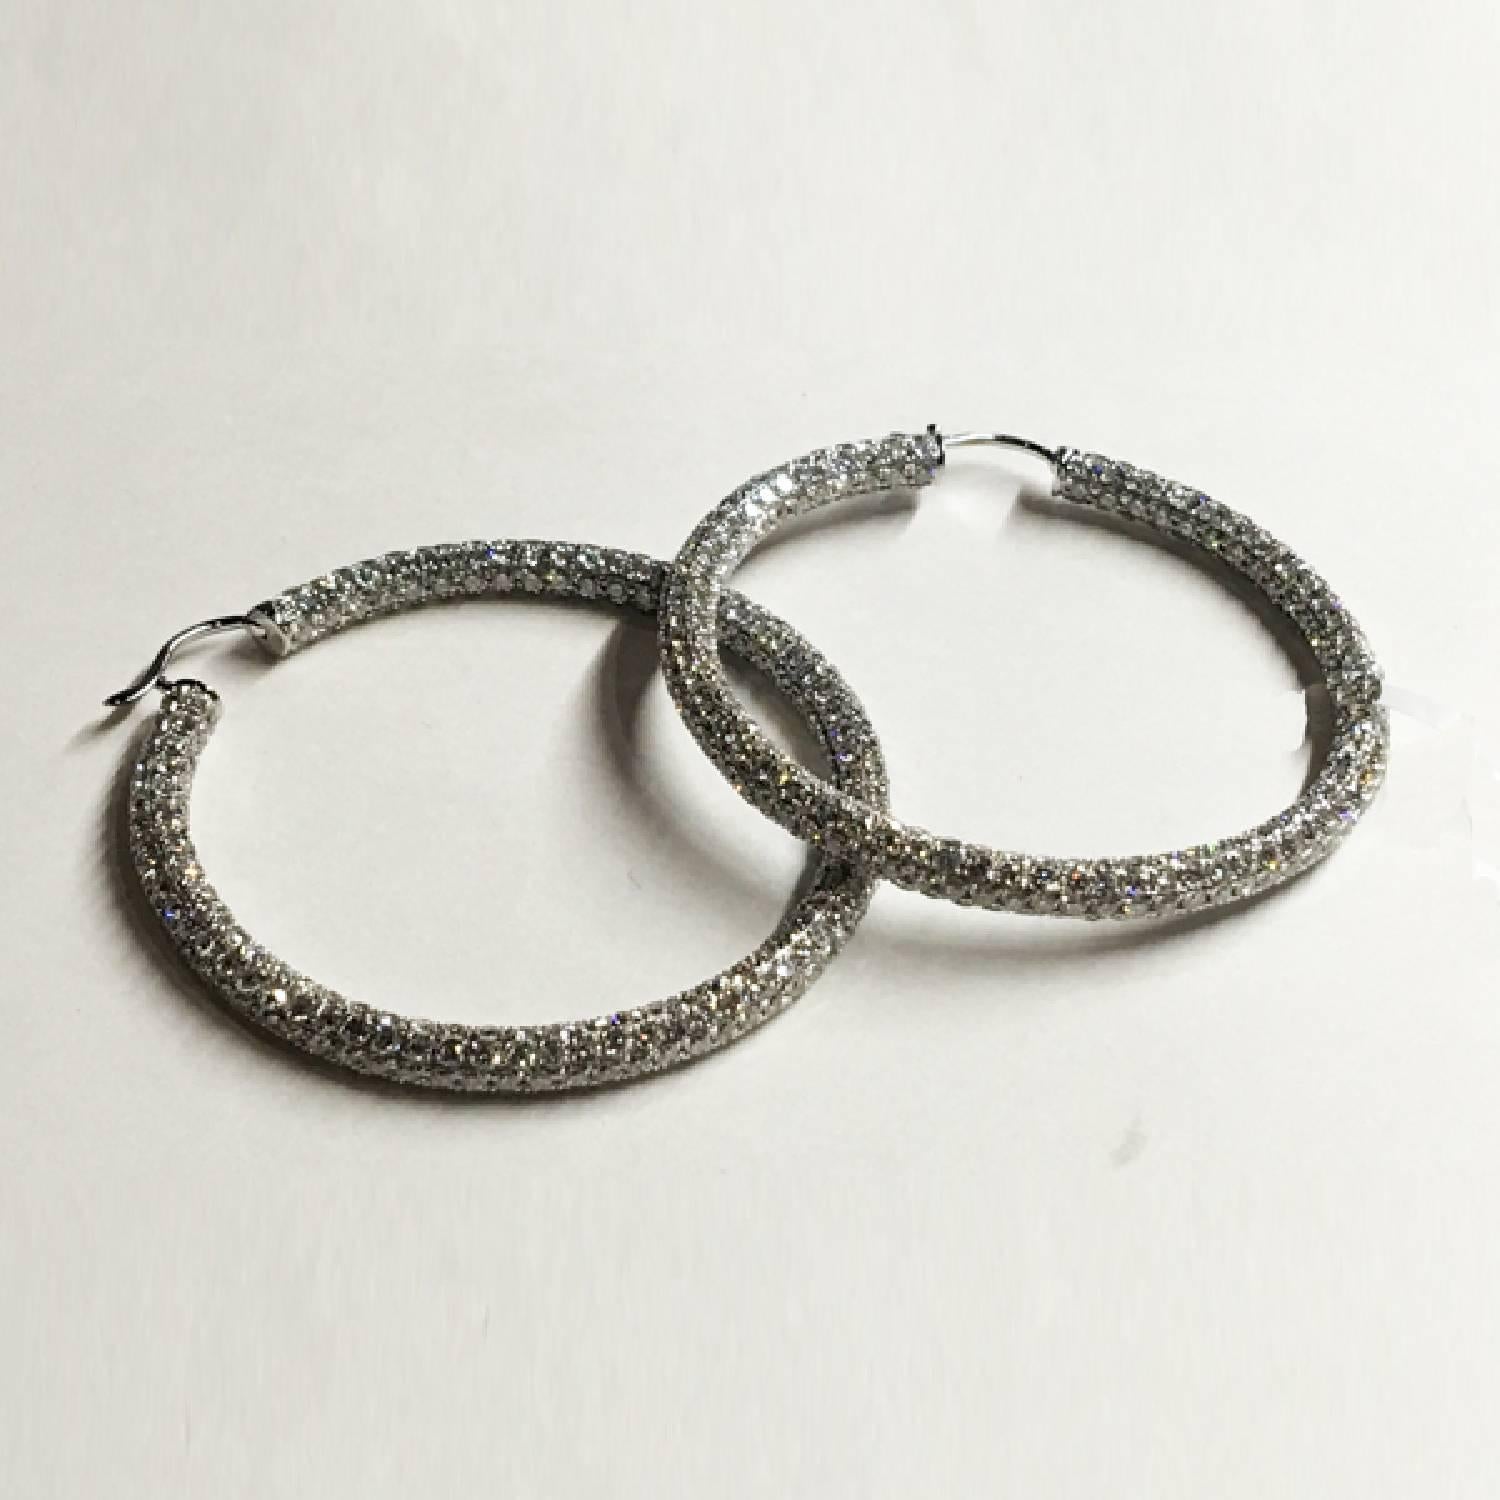 18k White Gold Hoop Style Earrings with 14.38 carats of pave set F-G color VS+ clarity round brilliant diamonds,